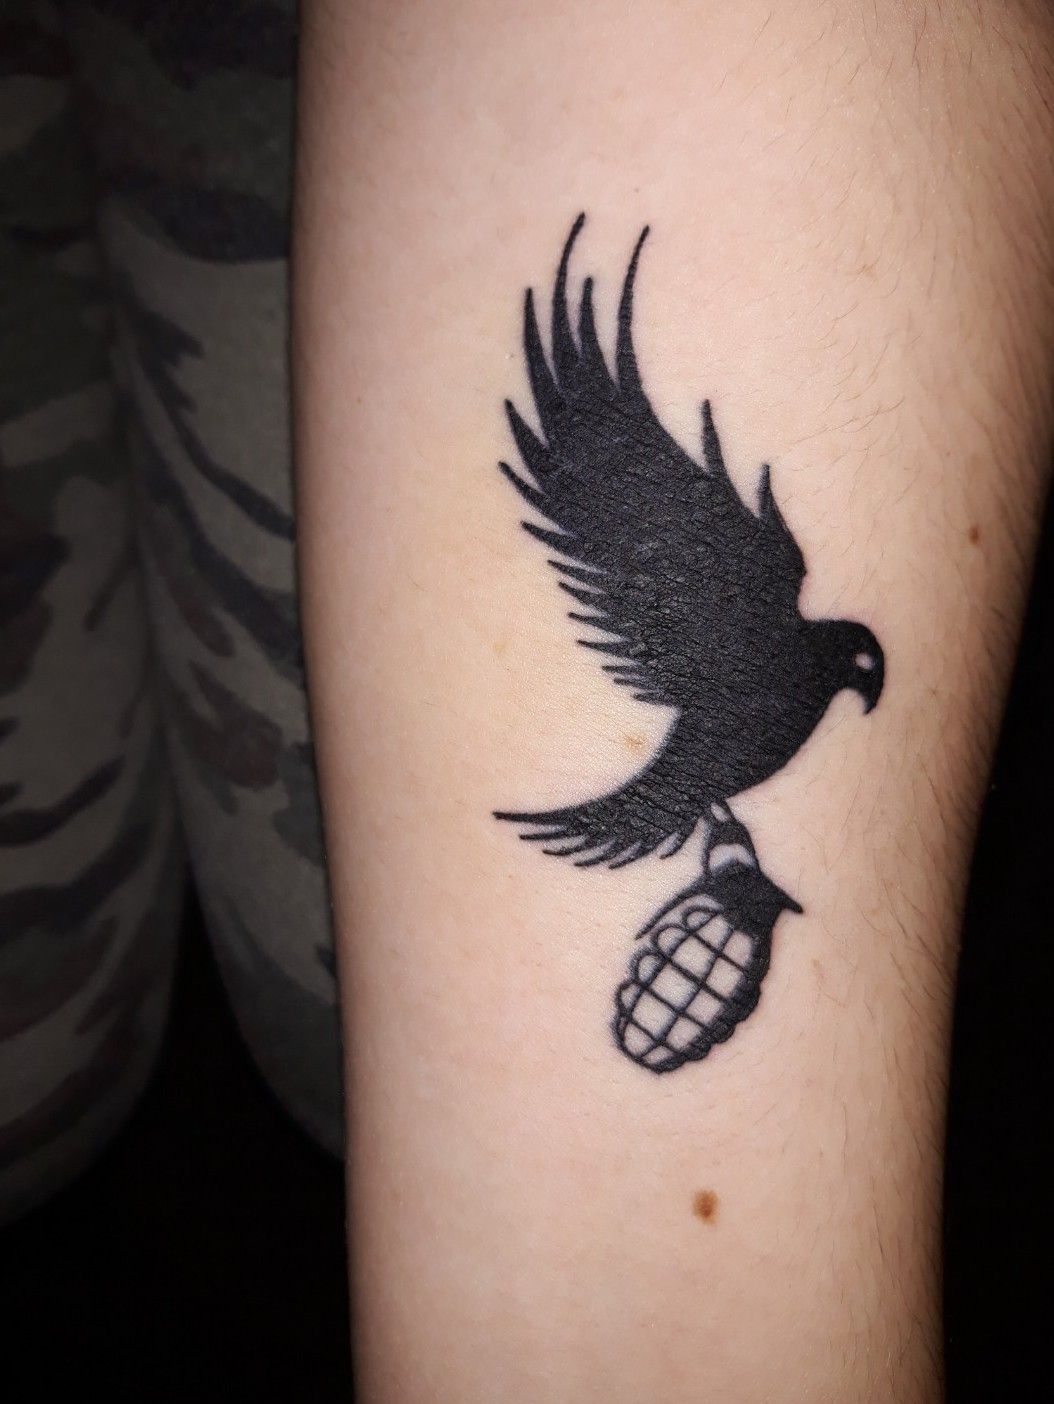 Tattoo uploaded by Anders Larsson  Hollywood undead Dove and grenade   Tattoodo